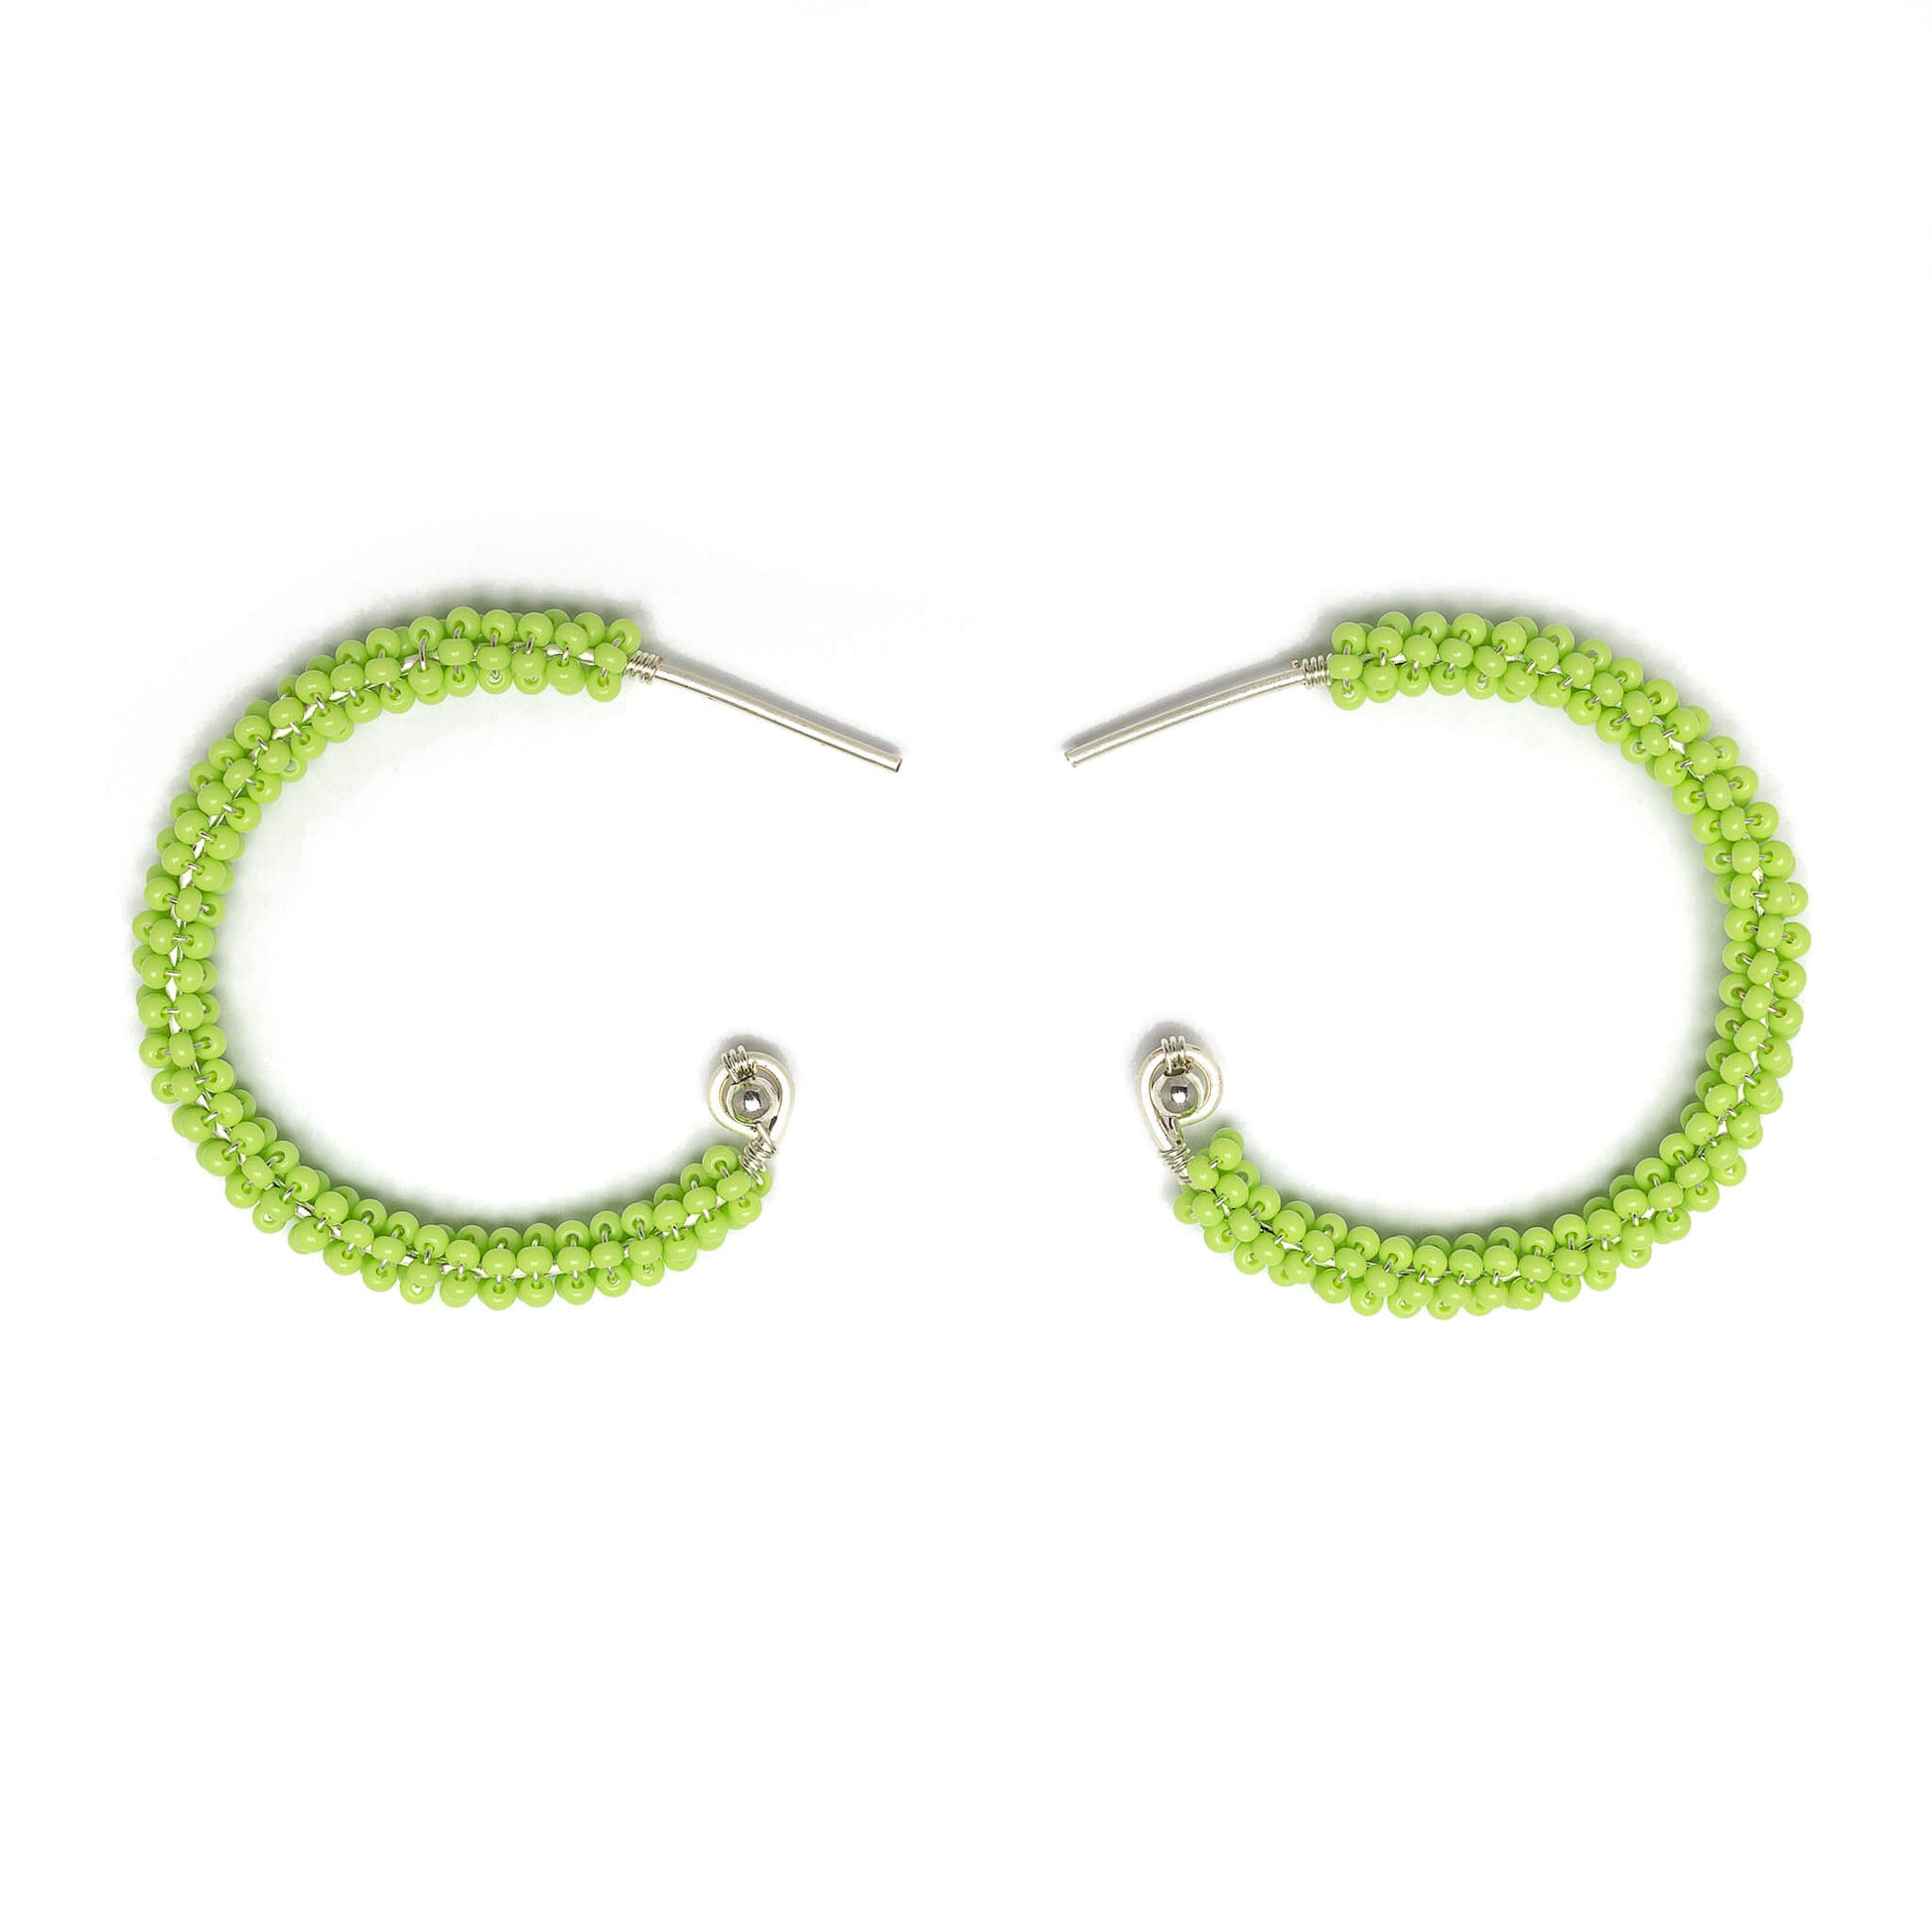 Florence Silver Hoop Earrings are 1.5 inches long, Silver and Lime Green Earrings. Wire Wrapped Earrings. Lightweight and comfortable earrings. Handmade for women. Open hoop earrings